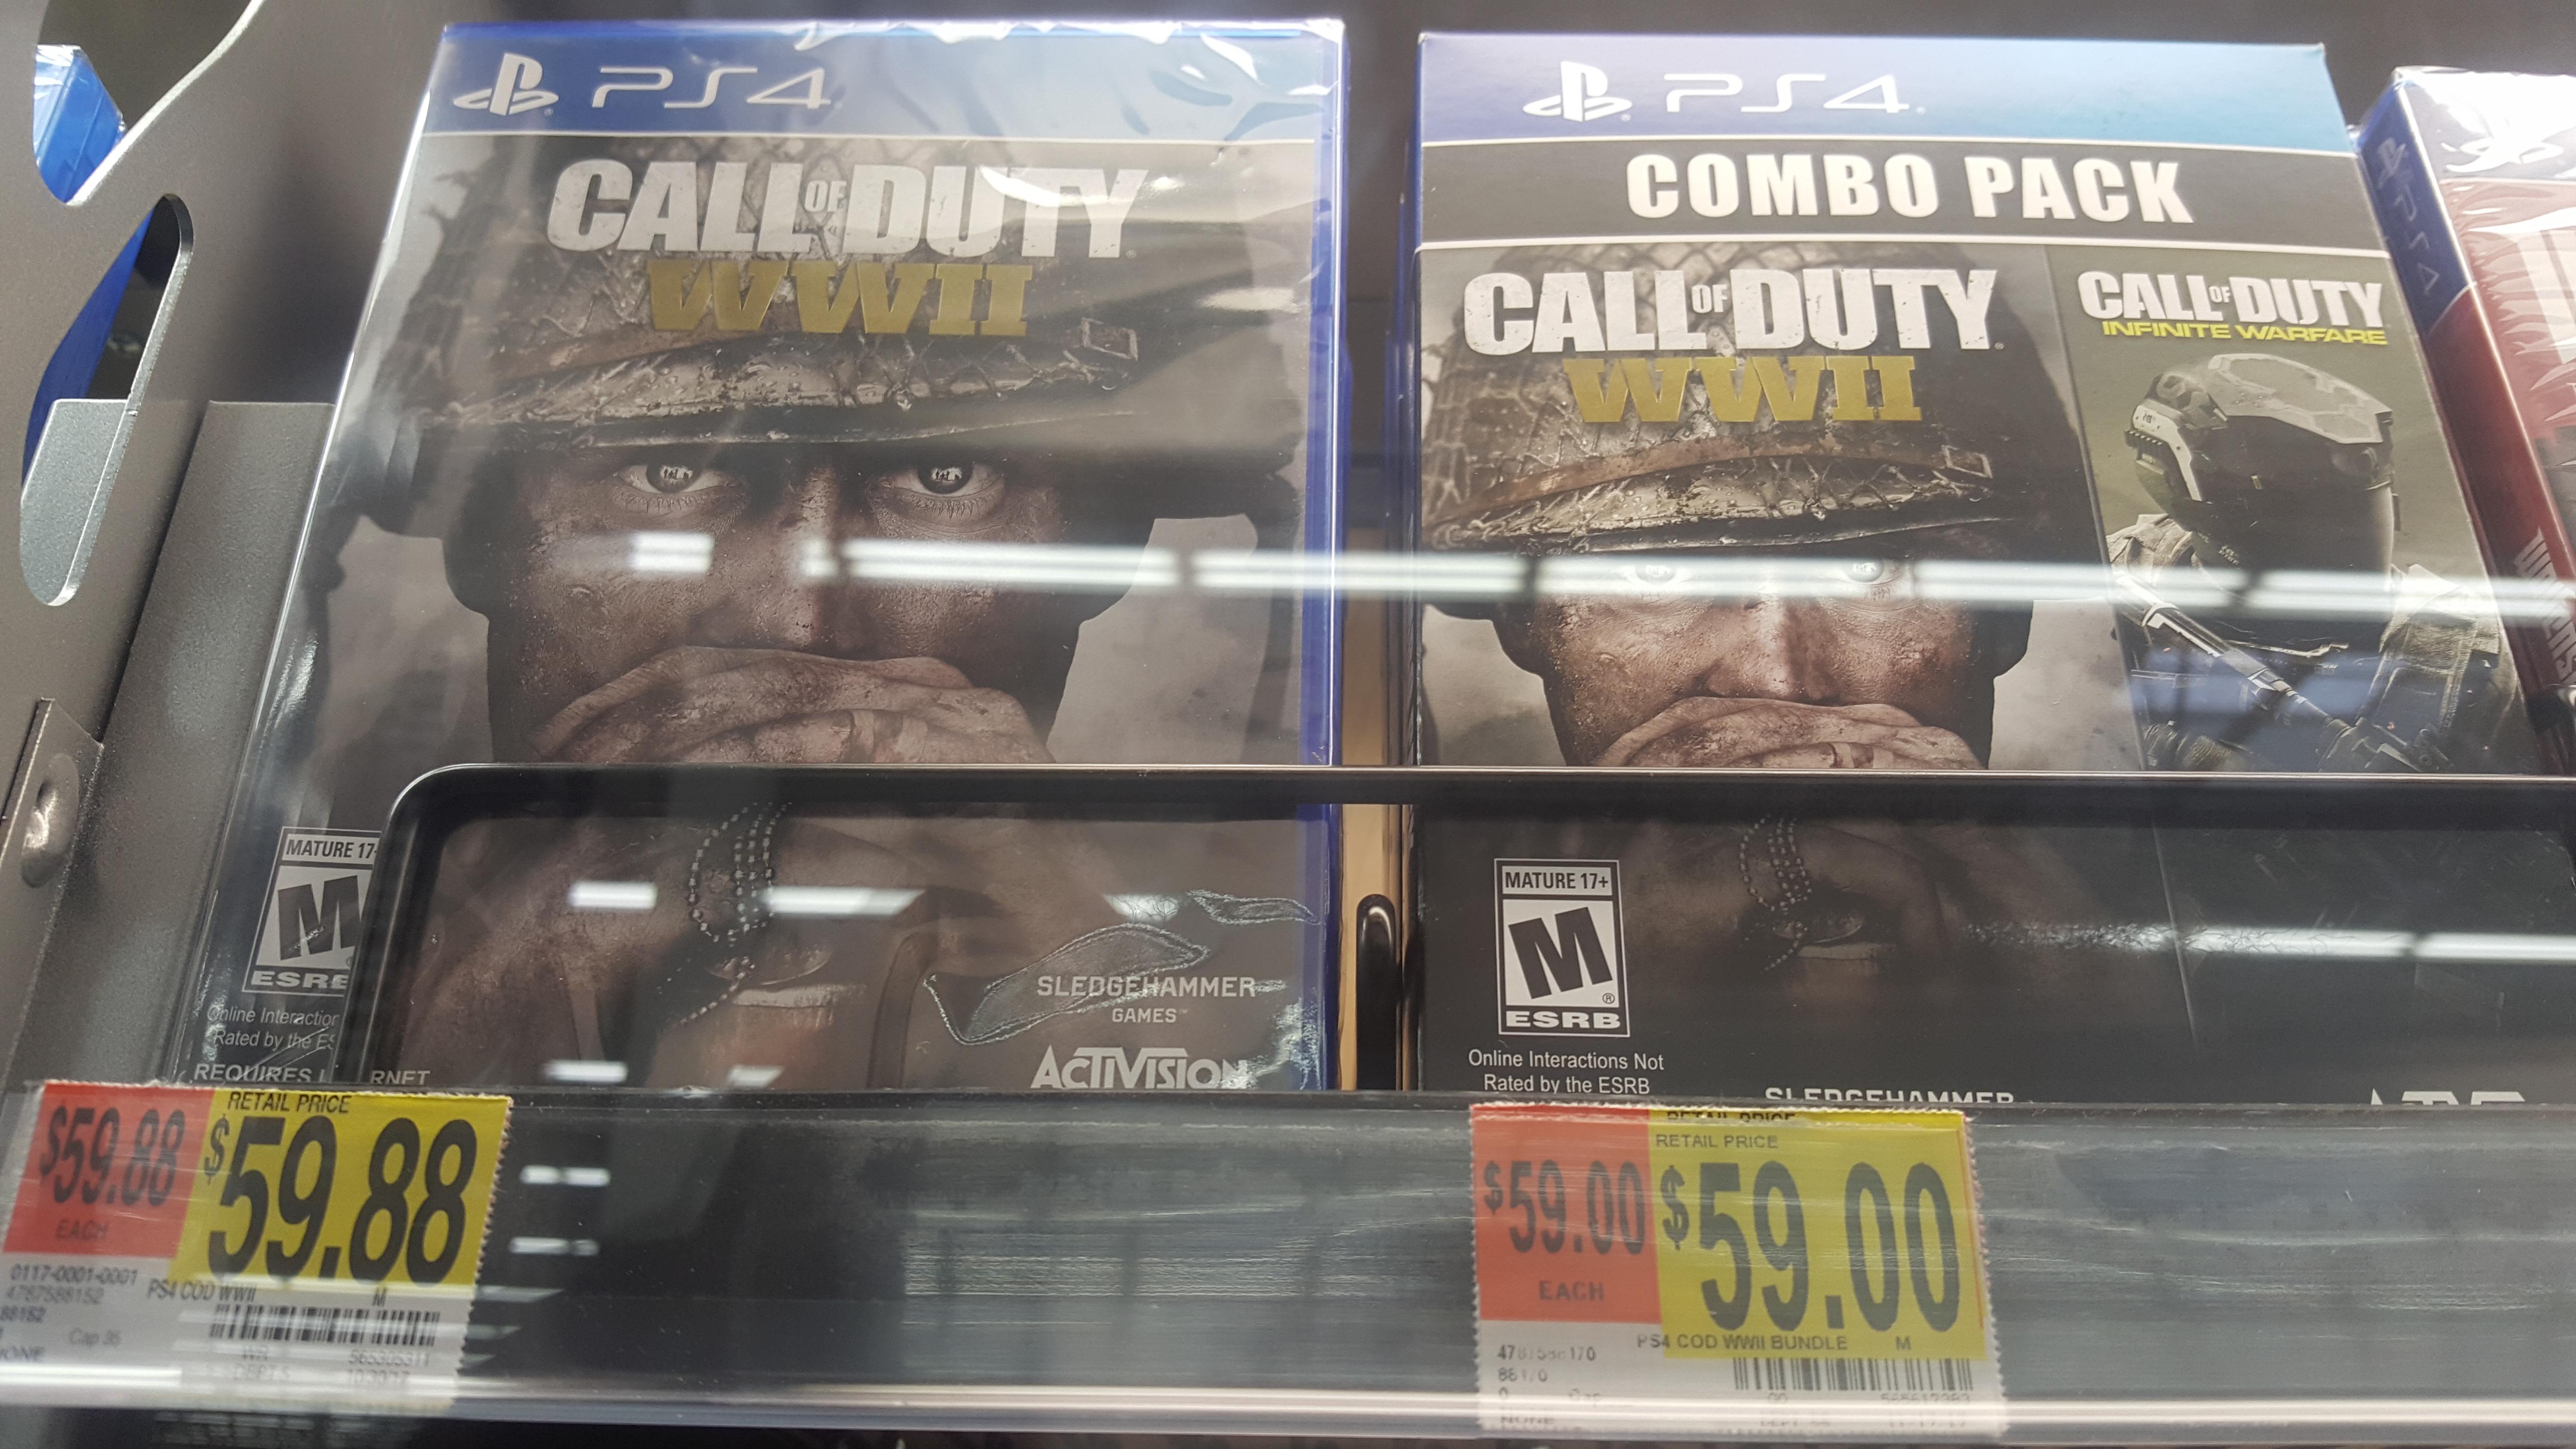 funny gaming memes - call of duty combo pack ww2 infinite warfare - BR54 Caldut Combo Pack Call Duty CallDuty Seedom Activision 59.88 $59.00 559.00